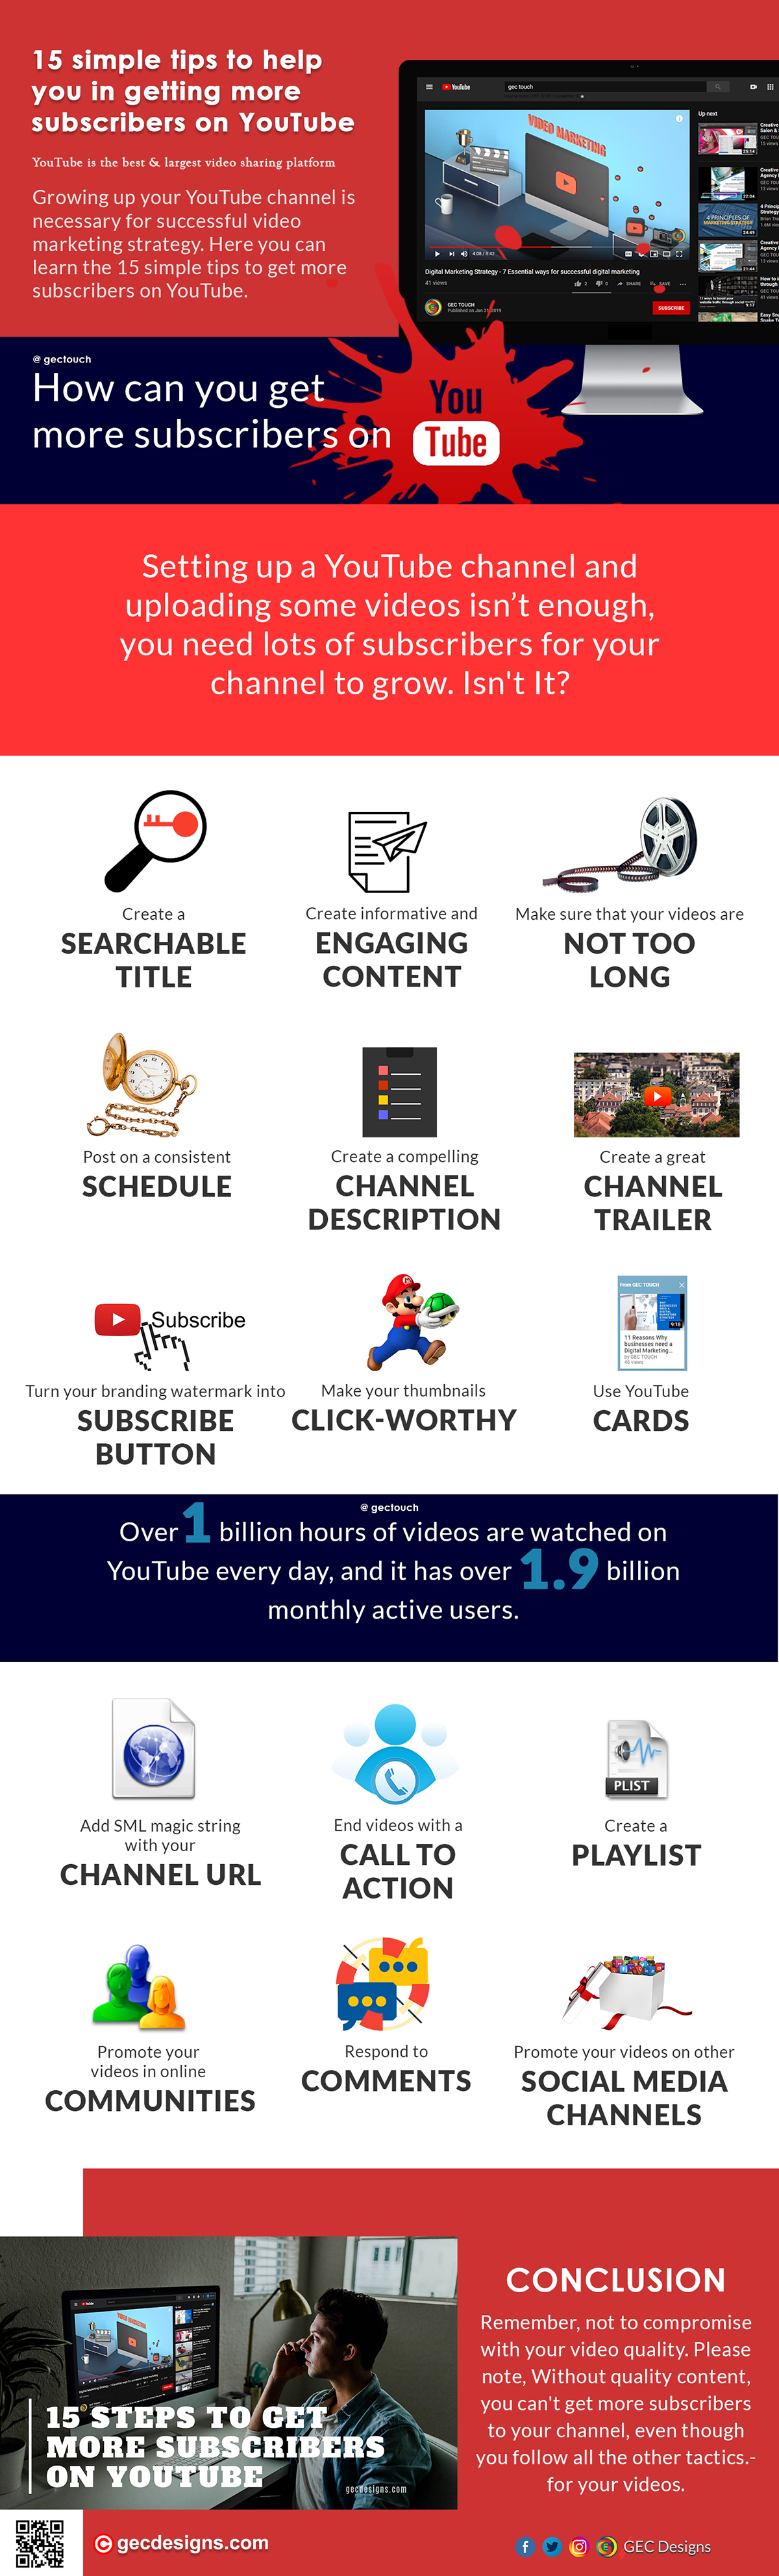 Tips to get more YouTube Subscribers Infographic